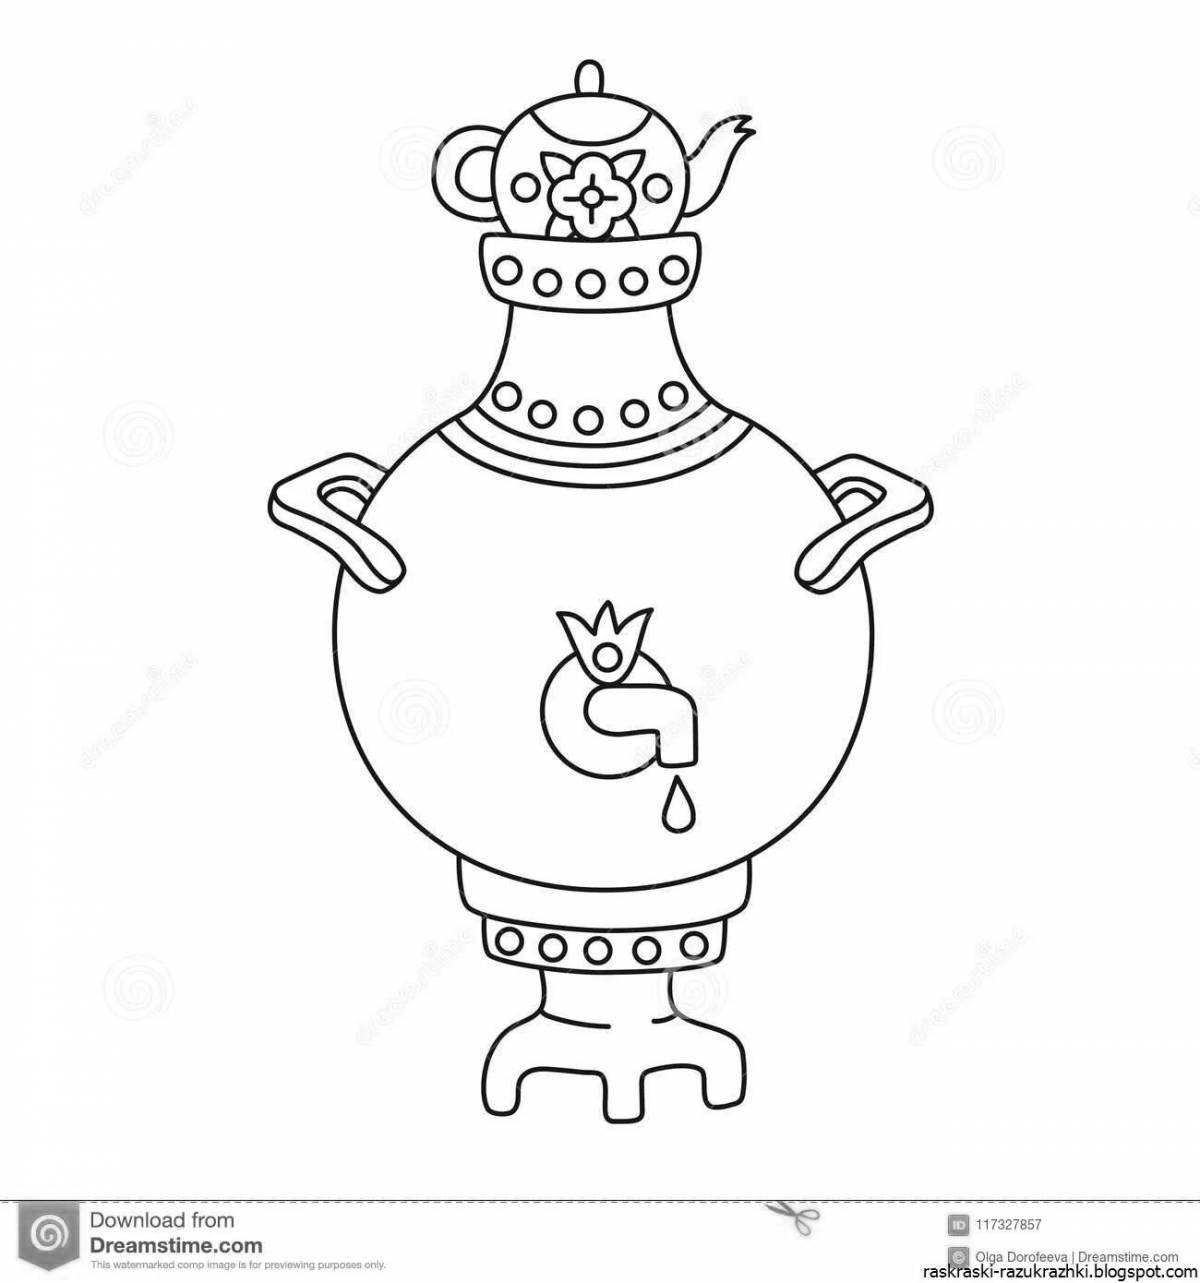 Colorful samovar coloring book for children 3-4 years old